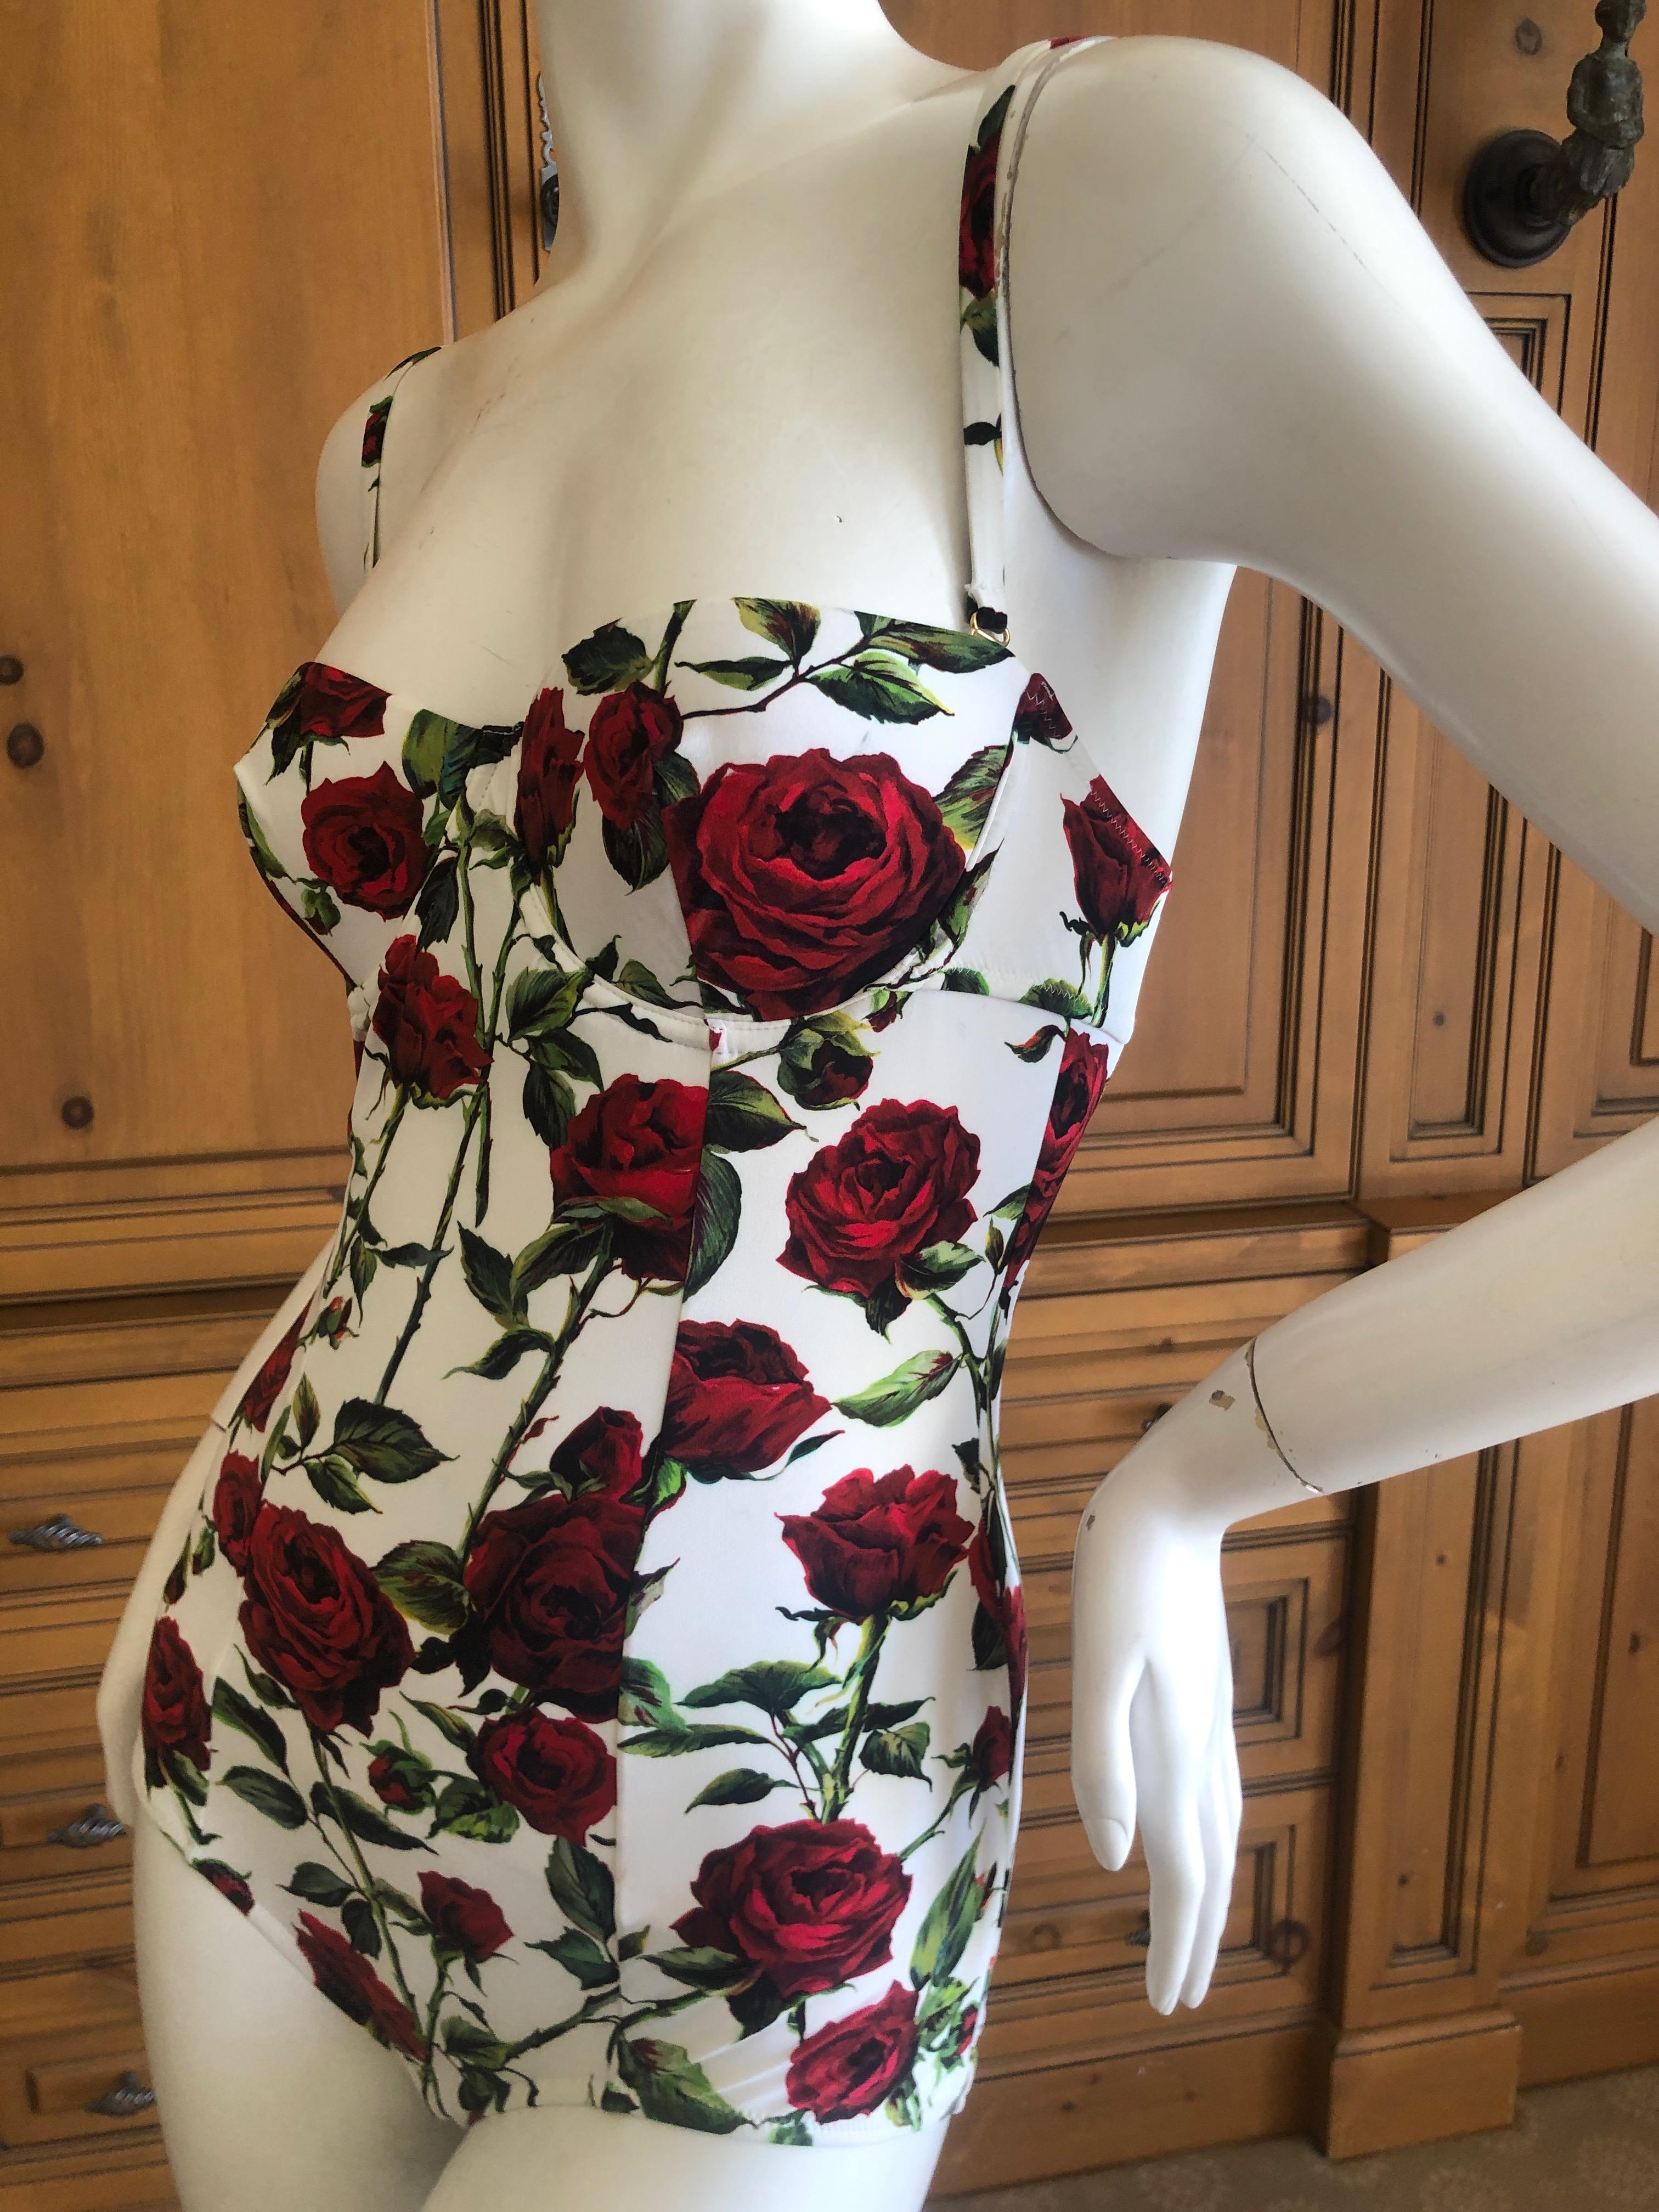 Dolce & Gabbana Floral One Piece Swimsuit
 New with Tags
 Size Small
Excellent unworn condition